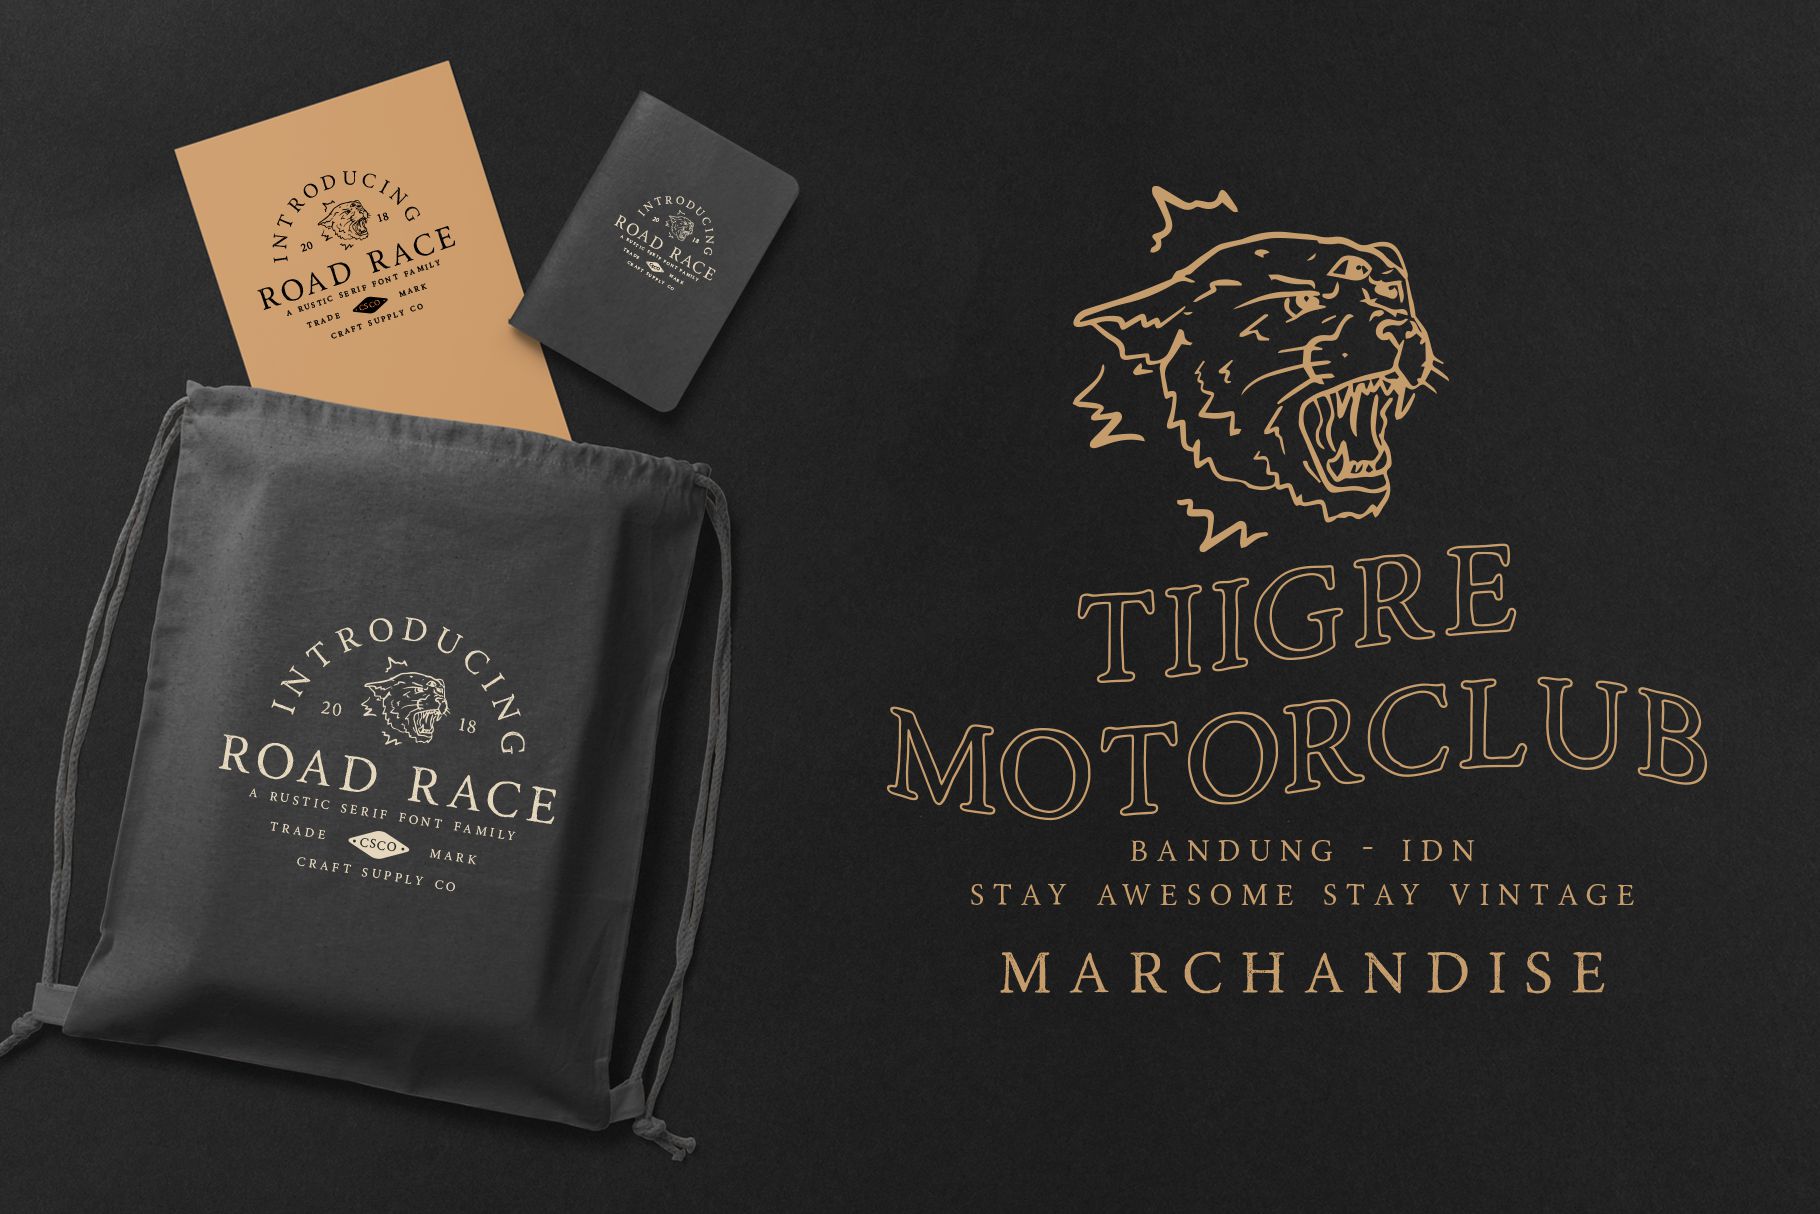 graphic for free -Road Race - Font Family